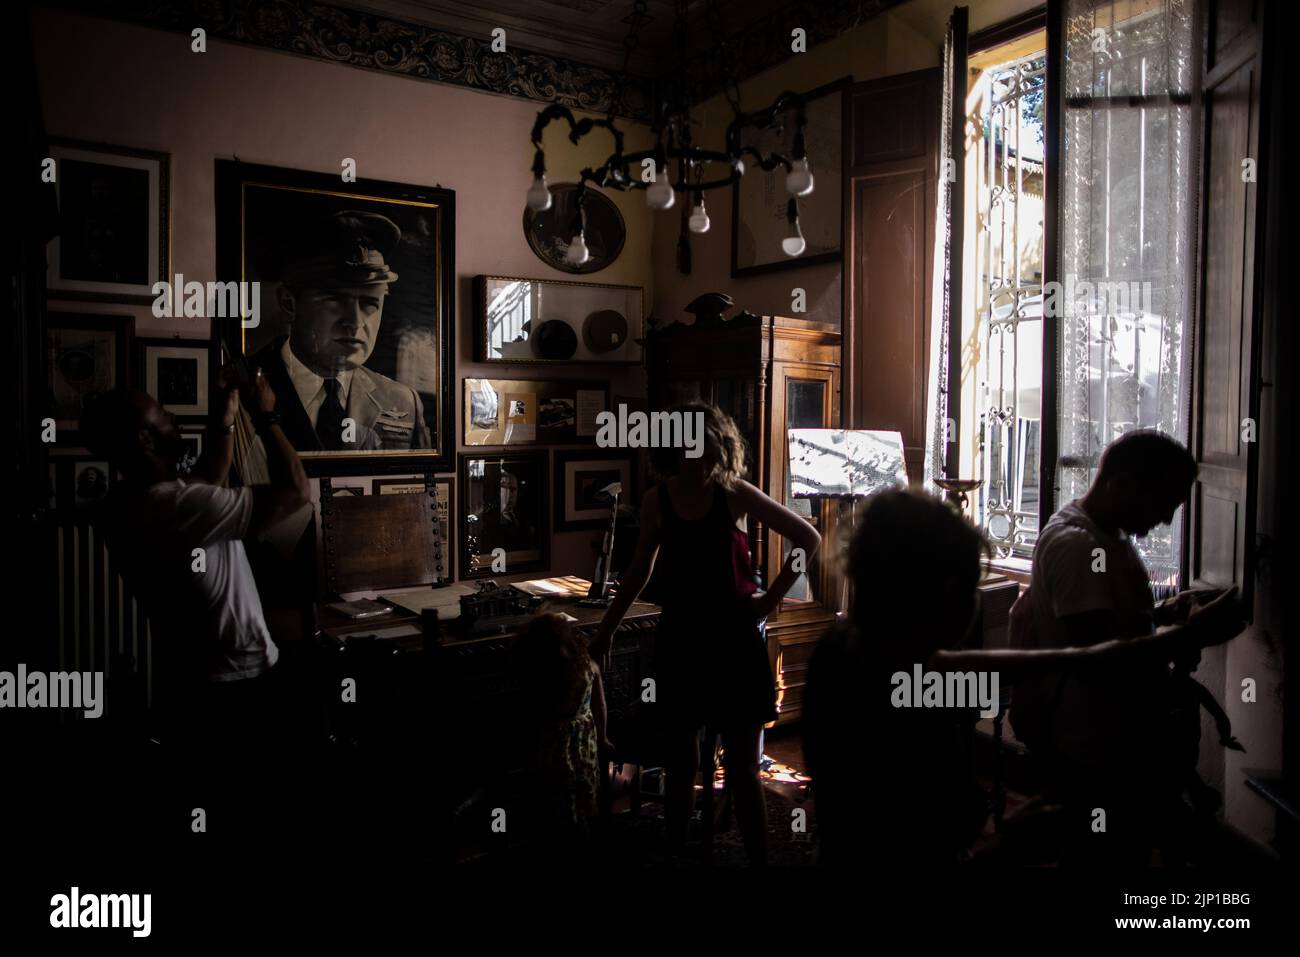 Forli, Italy. 10th Aug, 2022. Italians stand in the office of former Italian dictator Benito Mussolini, in his house in Forli, which was bought from the Mussolini family at the turn of the millennium and converted into a private museum. Italy will elect a new government on Sept. 25, 2022, with Giorgia Meloni's post-fascist 'Fratelli d'Italia' party expected to win. (to dpa 'Italy's election favorite Meloni and fascism - 'worry is real'') Credit: Oliver Weiken/dpa/Alamy Live News Stock Photo